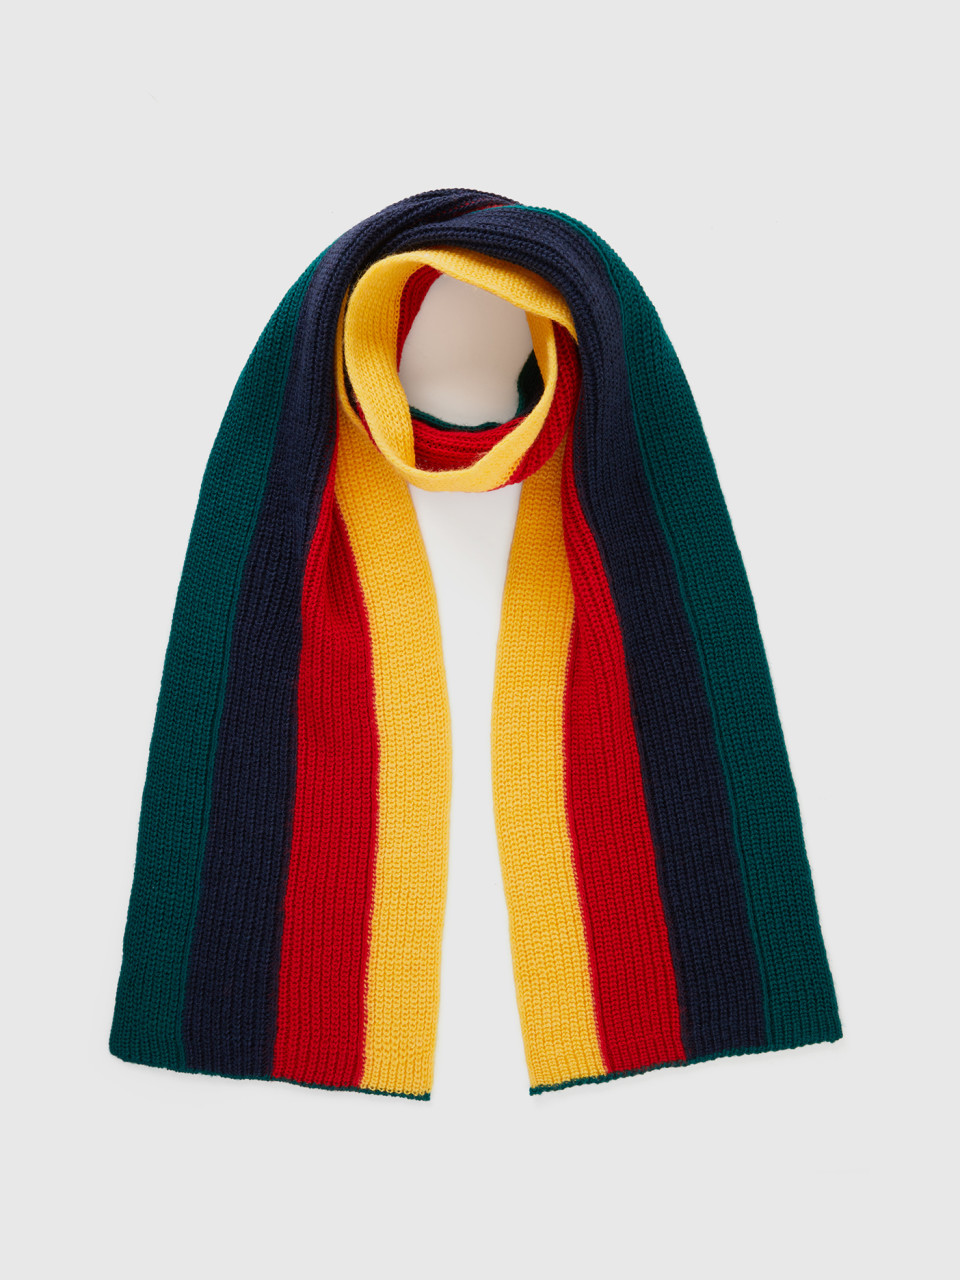 Benetton, Scarf In Wool Blend With Inlays, Multi-color, Kids